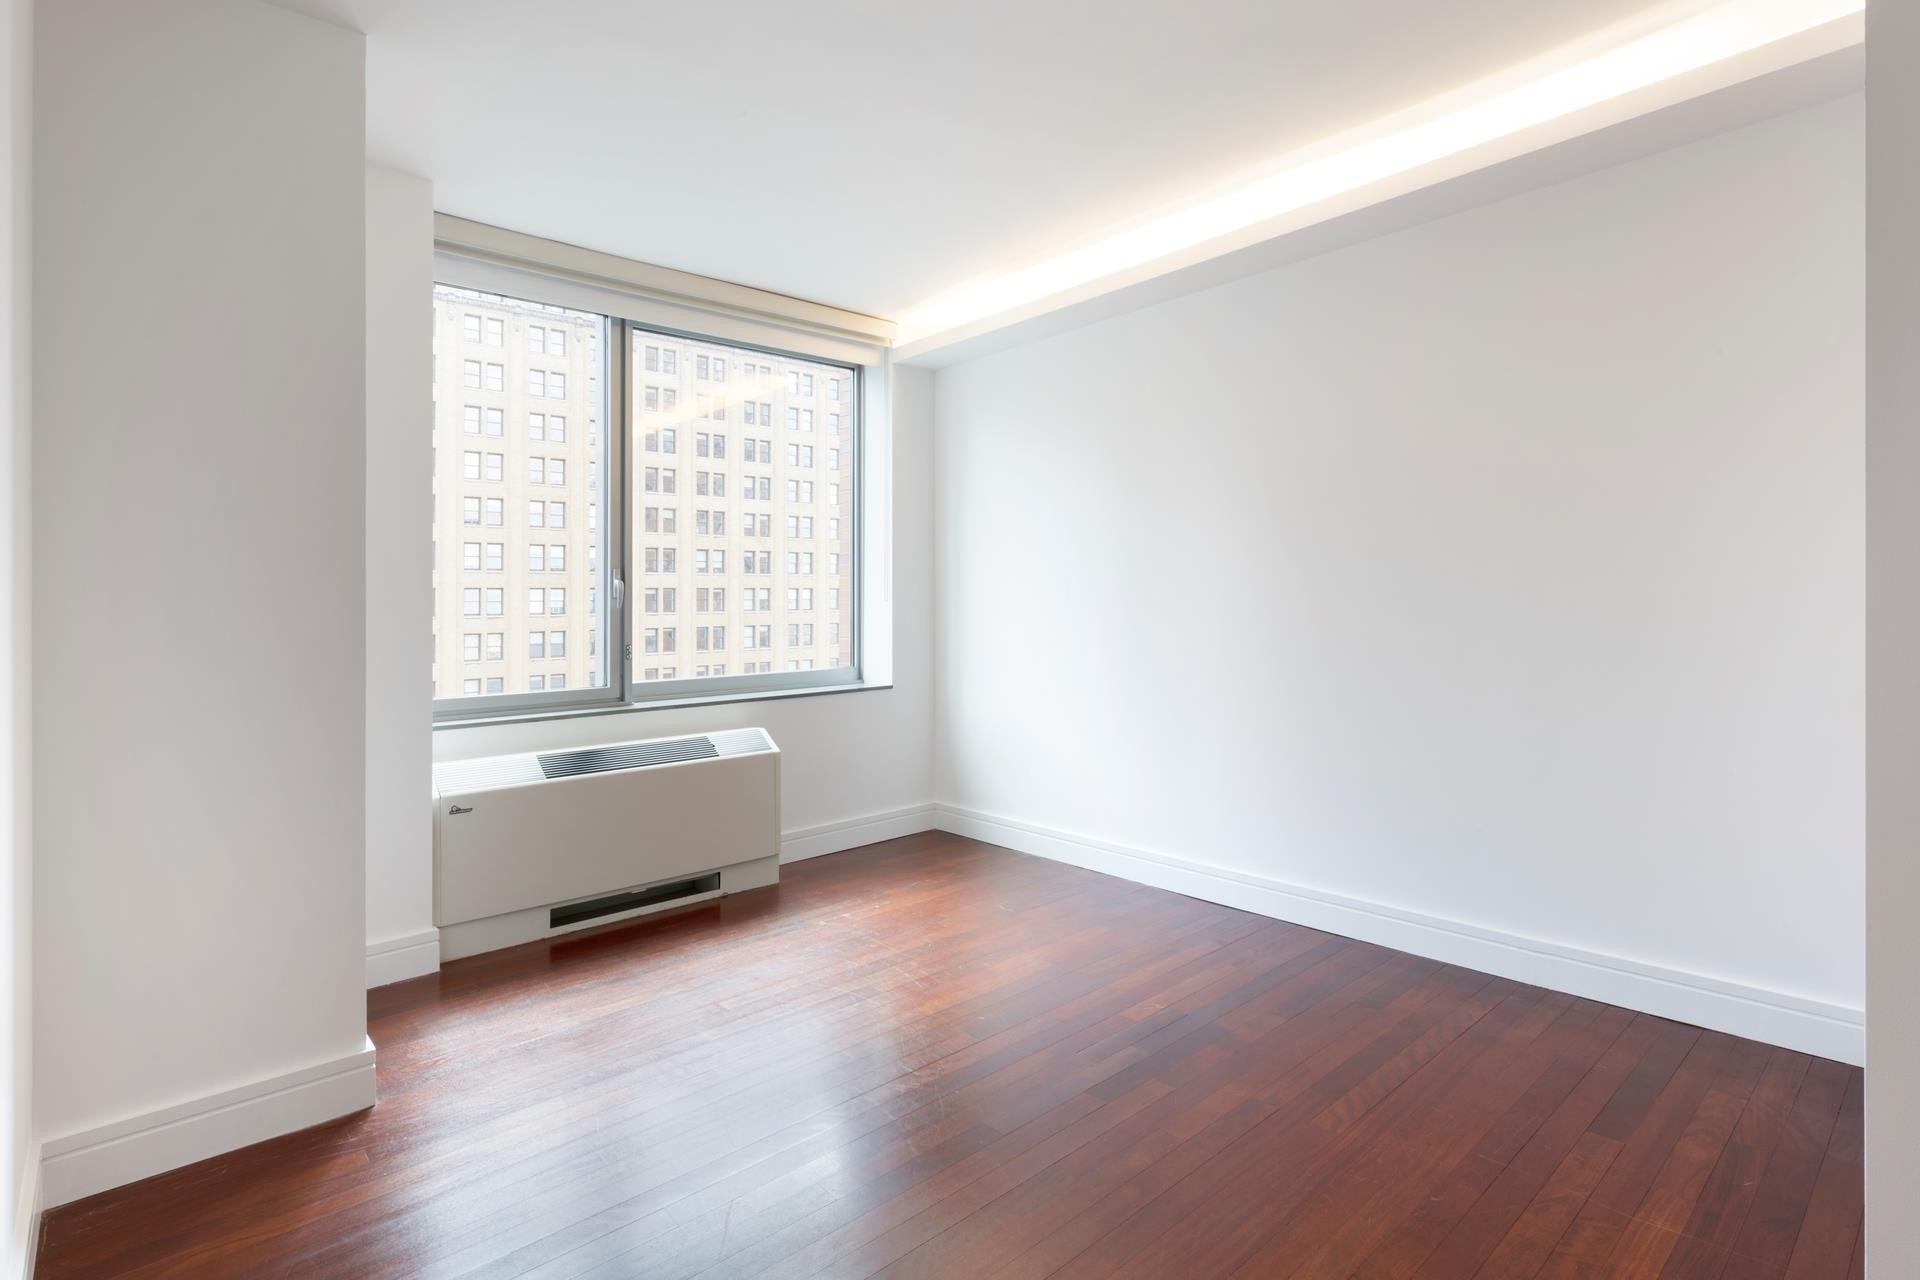 8. Rentals at Millennium Towers R, 30 WEST ST, 21AB New York